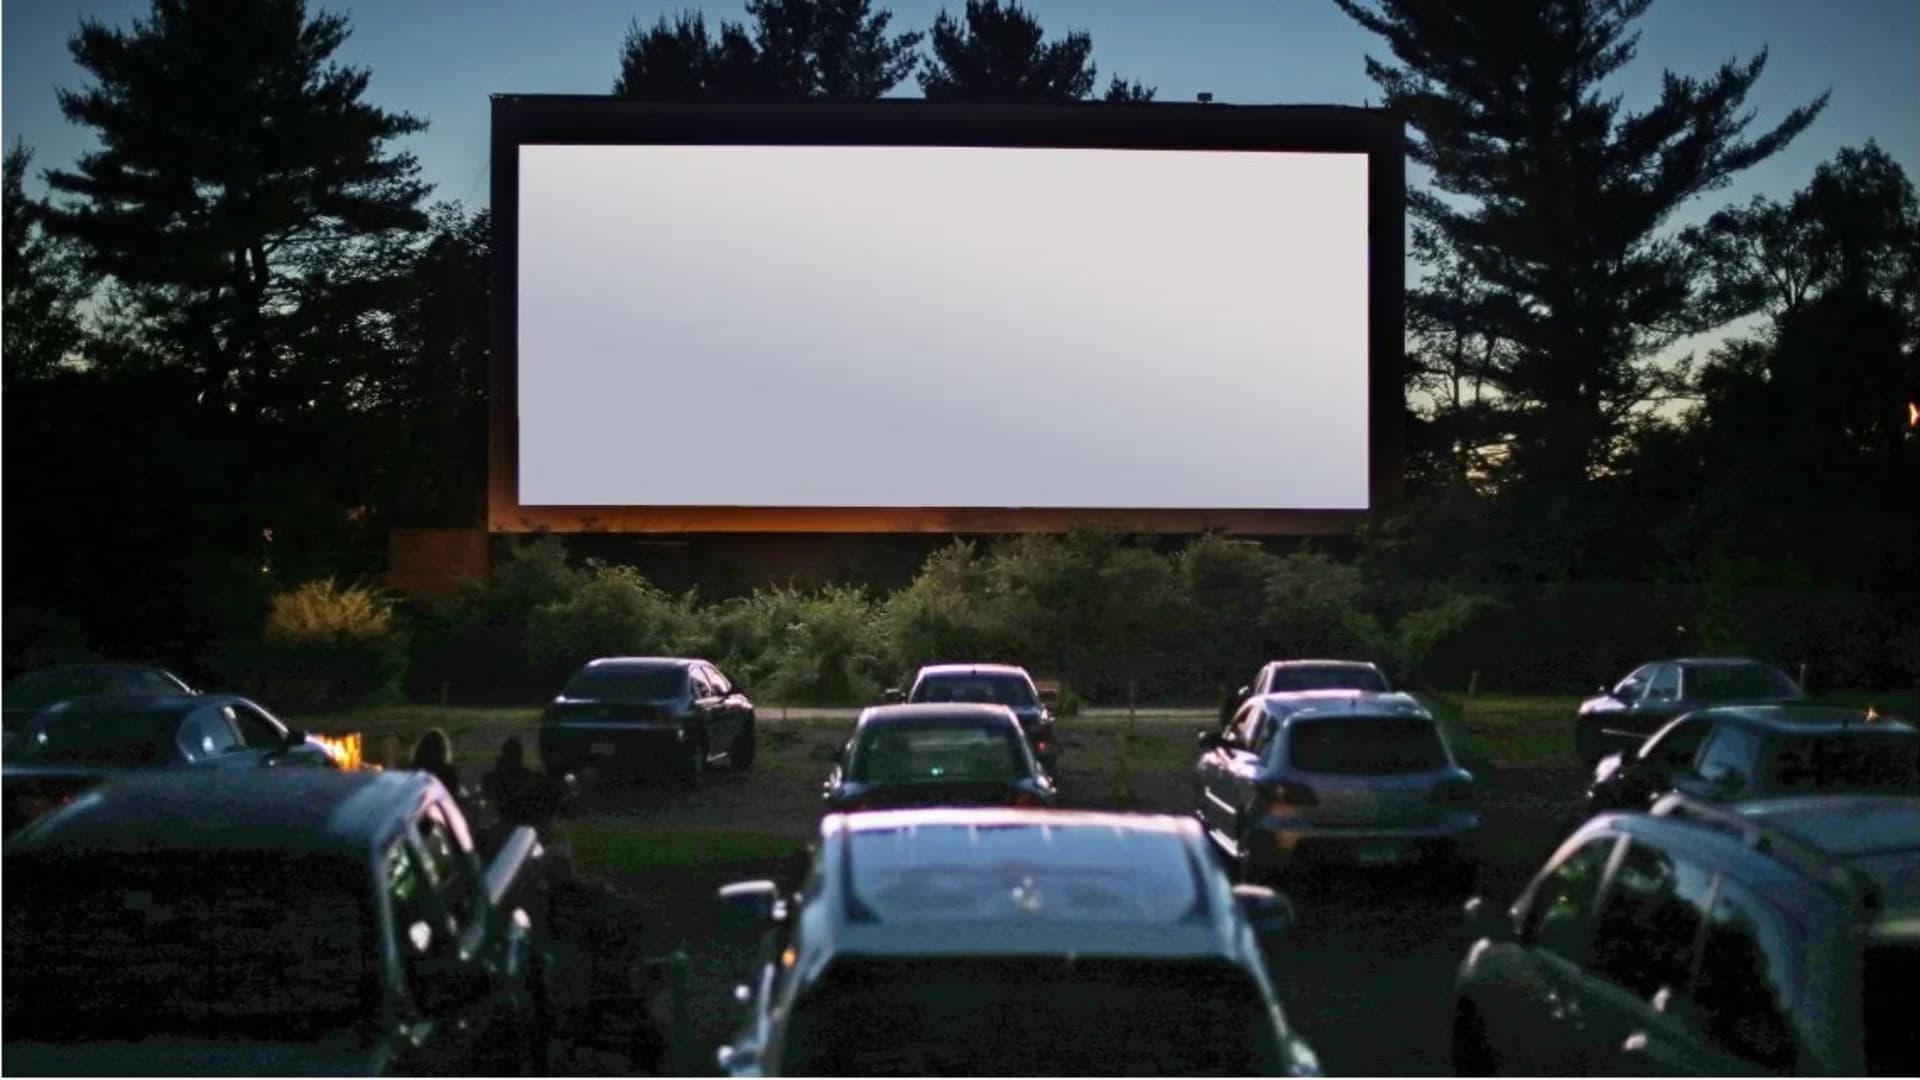 Union County to hold walk-up, drive-up movie nights